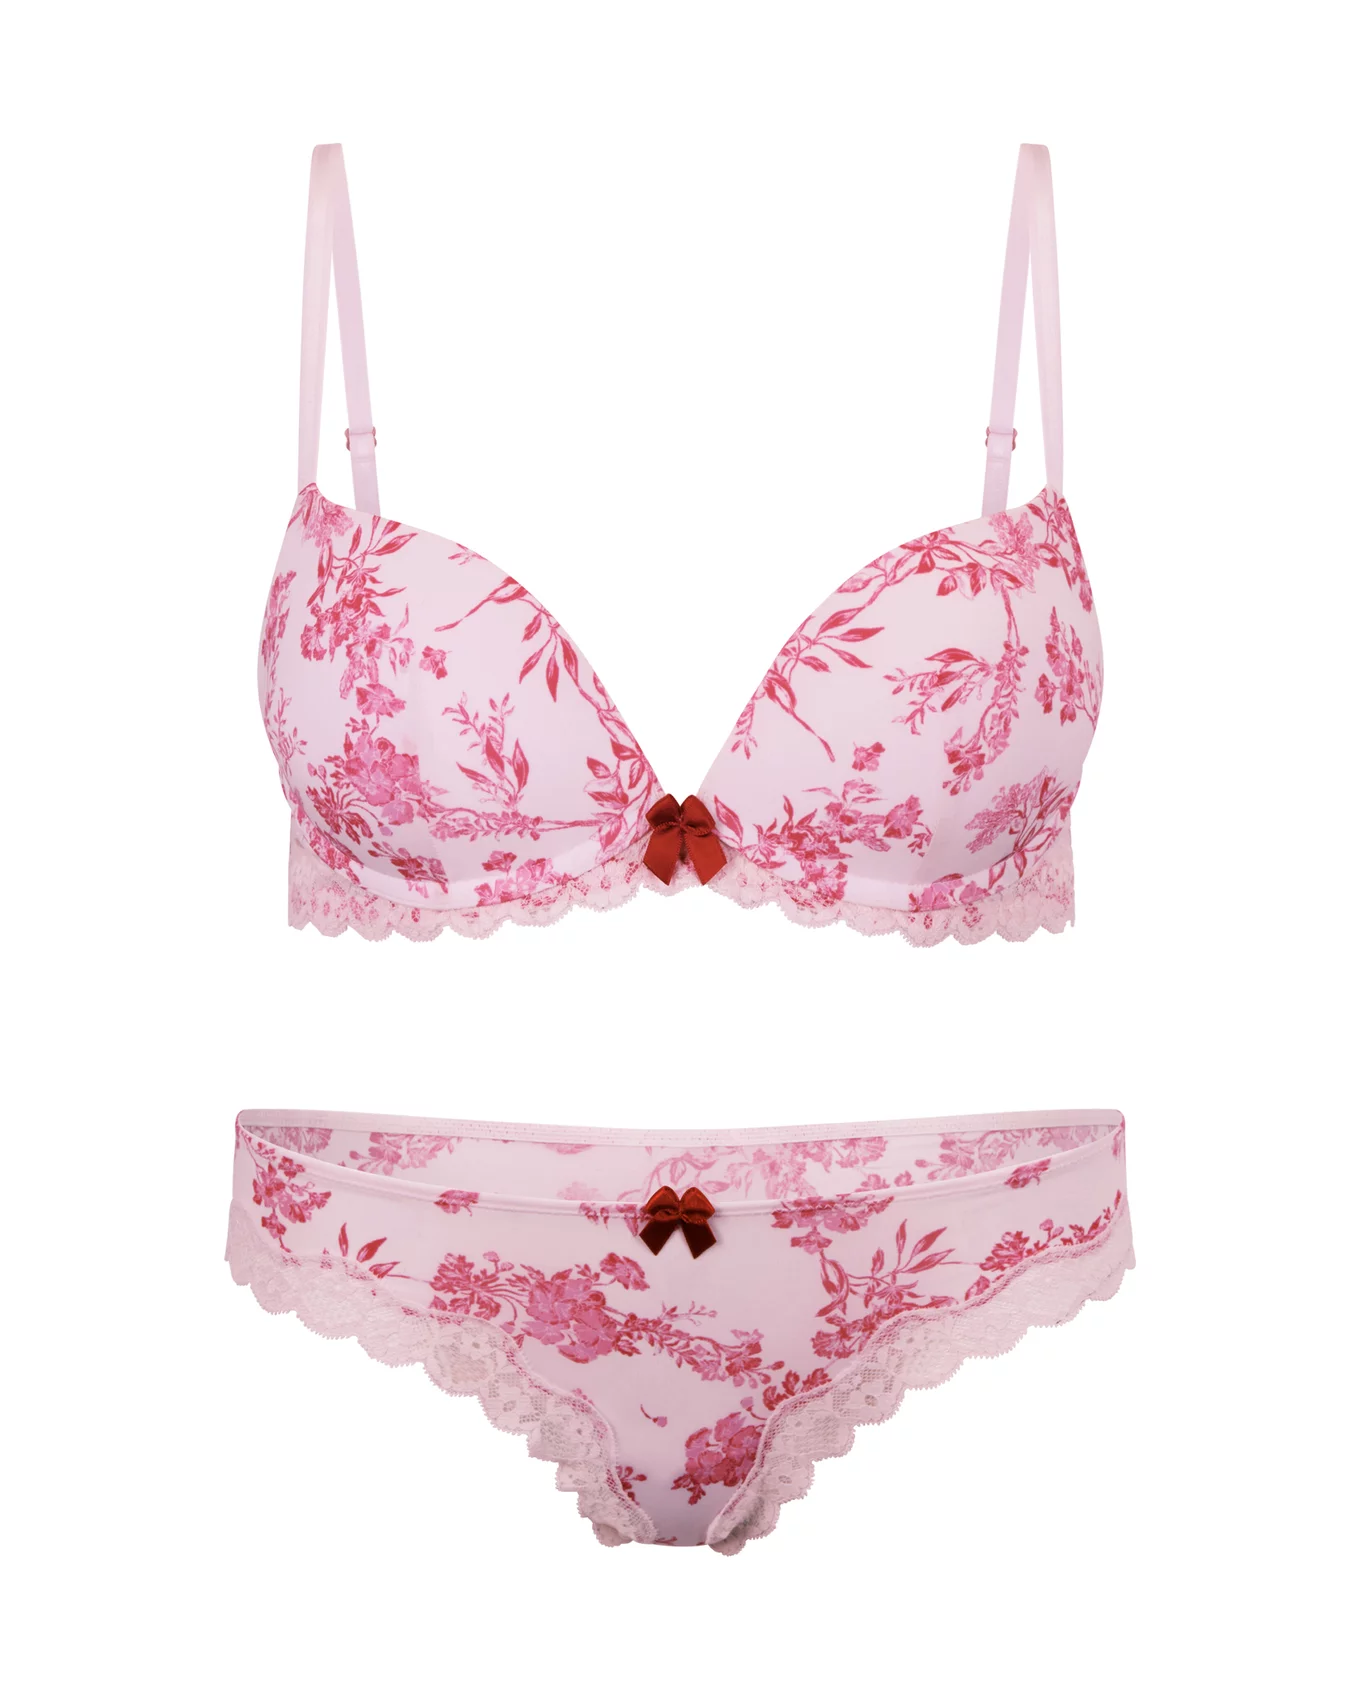 Bra And Panty Combo - Pink, 36c, Free at Rs 350/piece